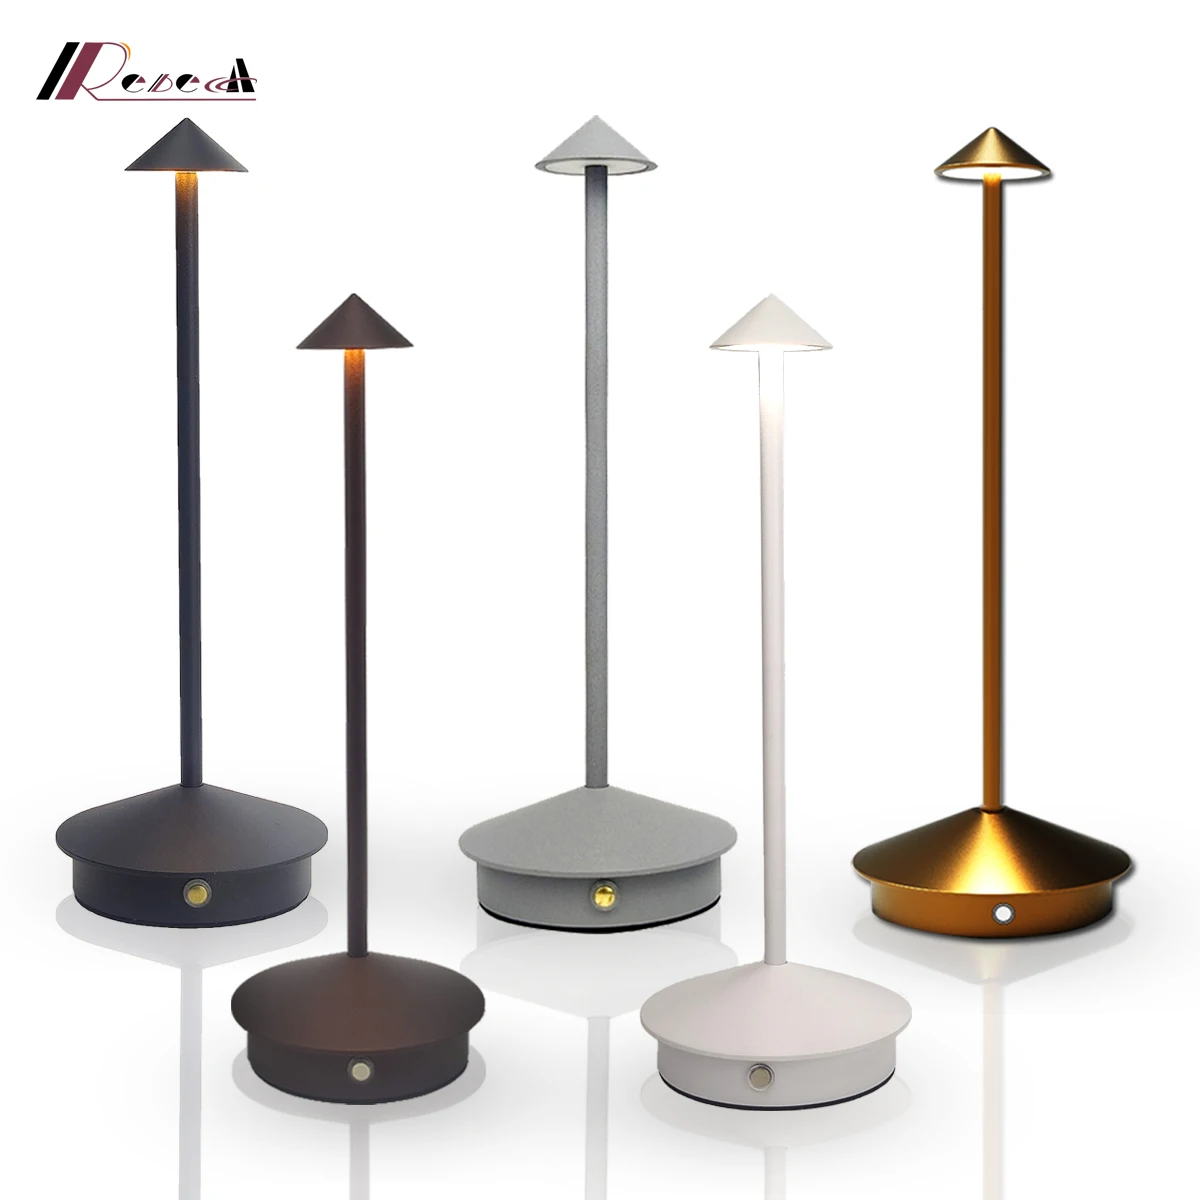 

Arrow table lamp LED rechargeable table lamp portable all aluminum bedside lamp restaurant bar atmosphere night lamp